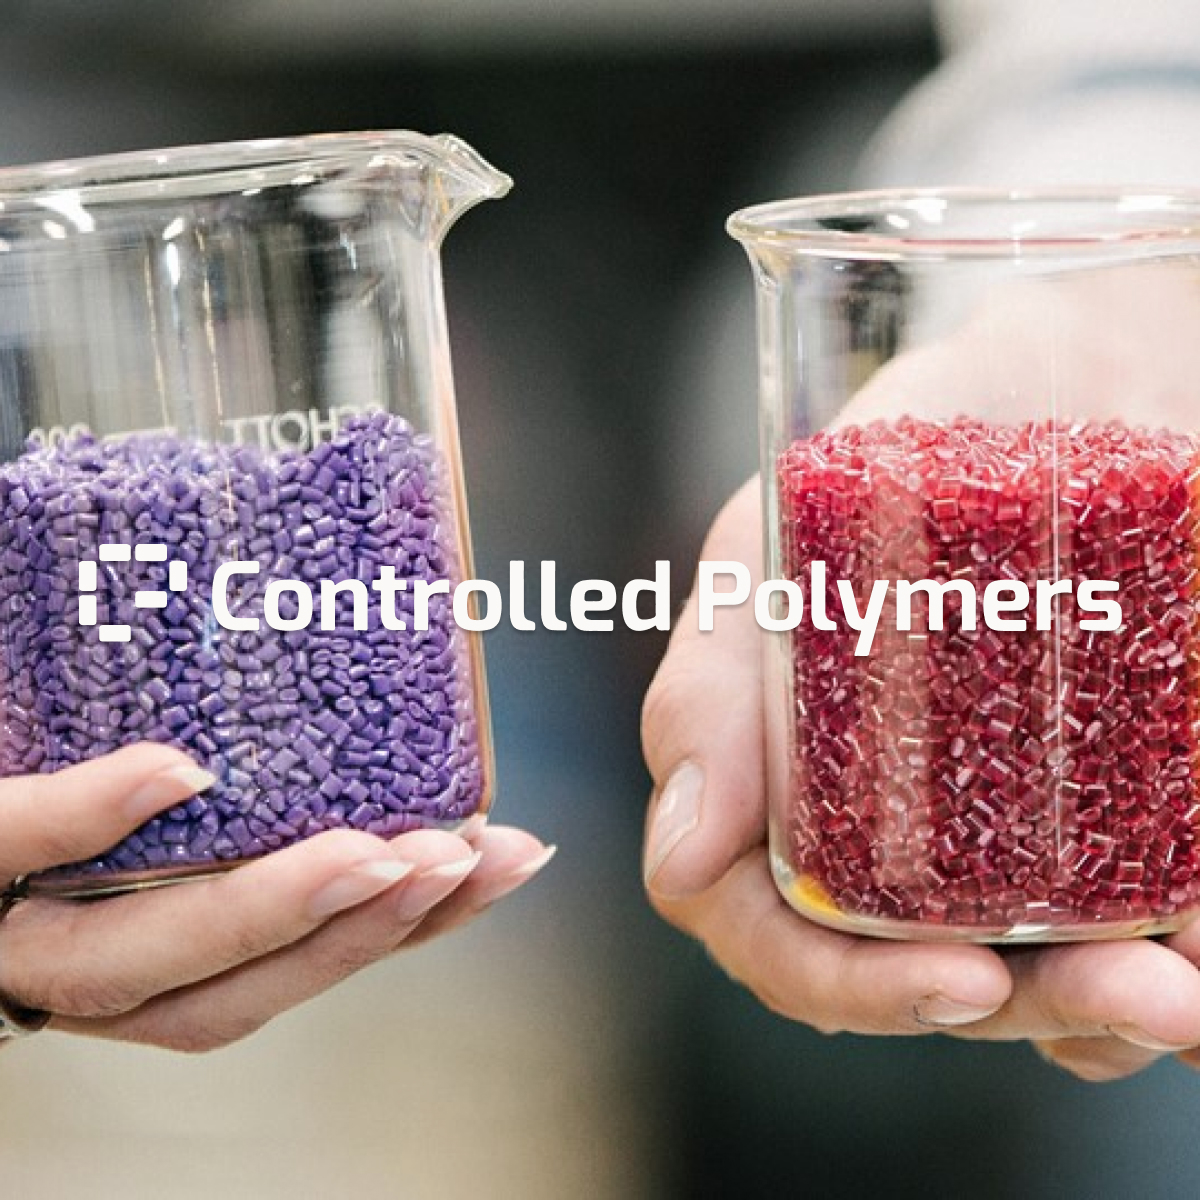 Controlled Polymers - Customer Story